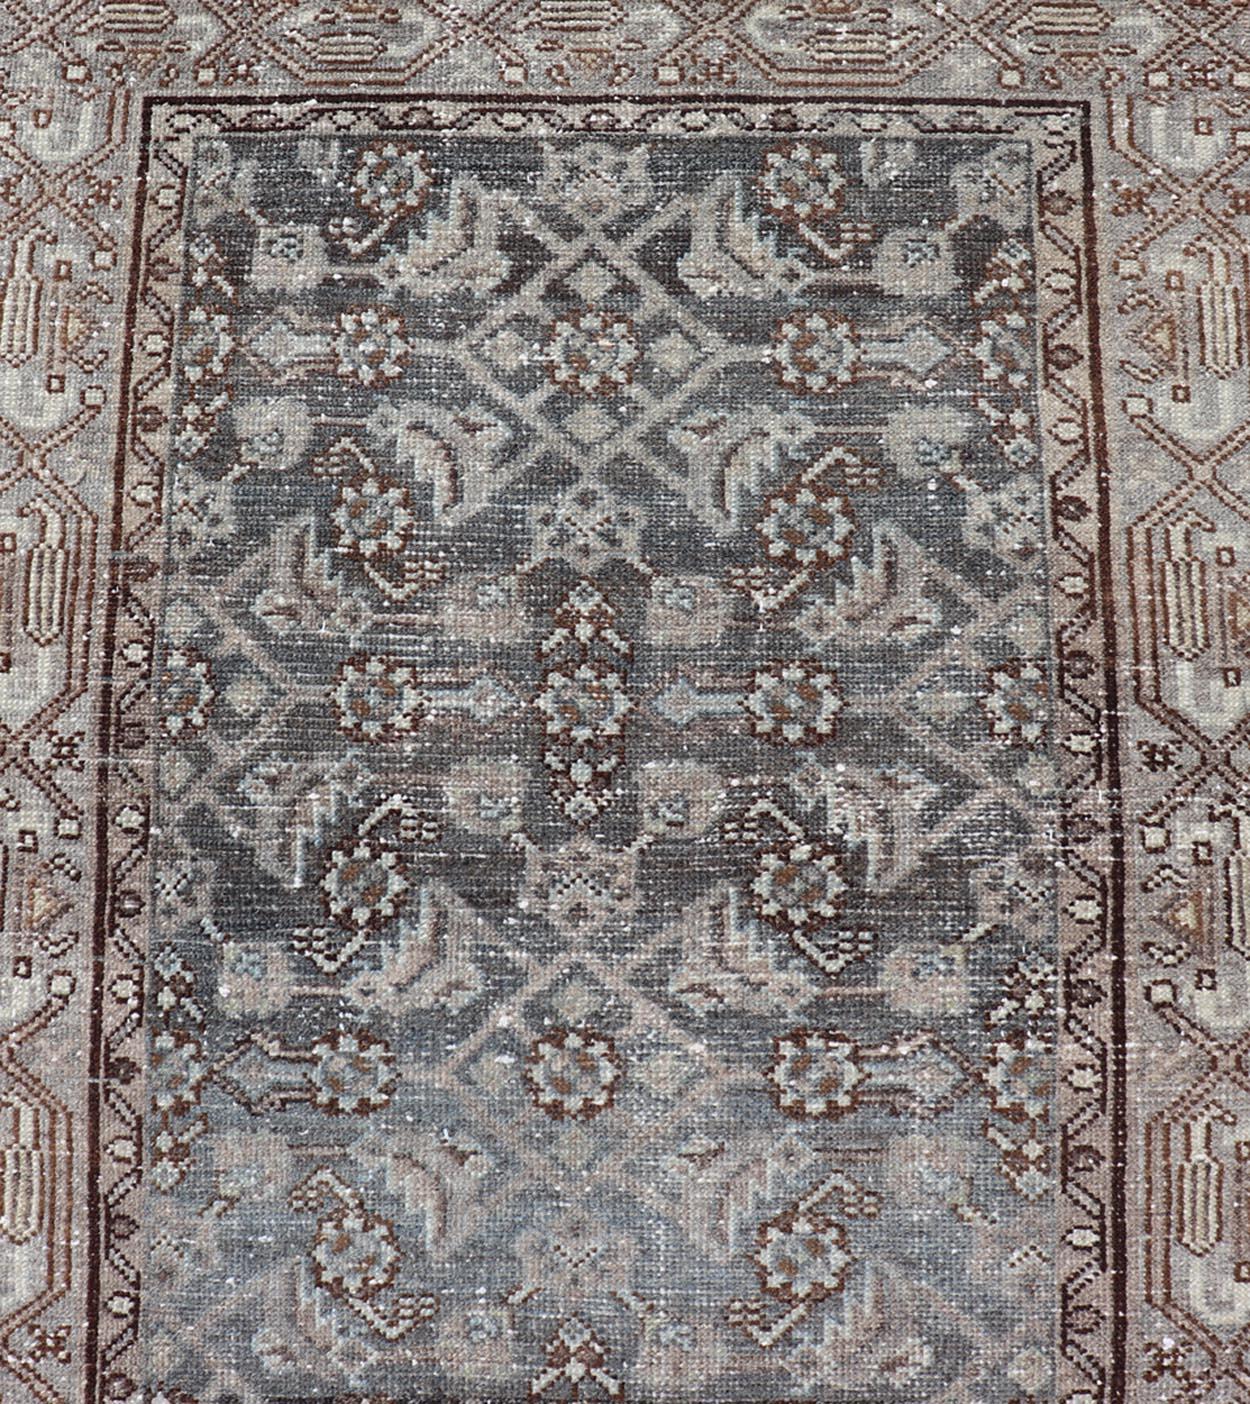 This antique Persian Hamadan rug has been hand-knotted in wool and features an all-over sub-geometric design rendered in multicolor. A complementary, multi-tiered border encompasses the entirety of the piece; making it a marvelous fit for a wide